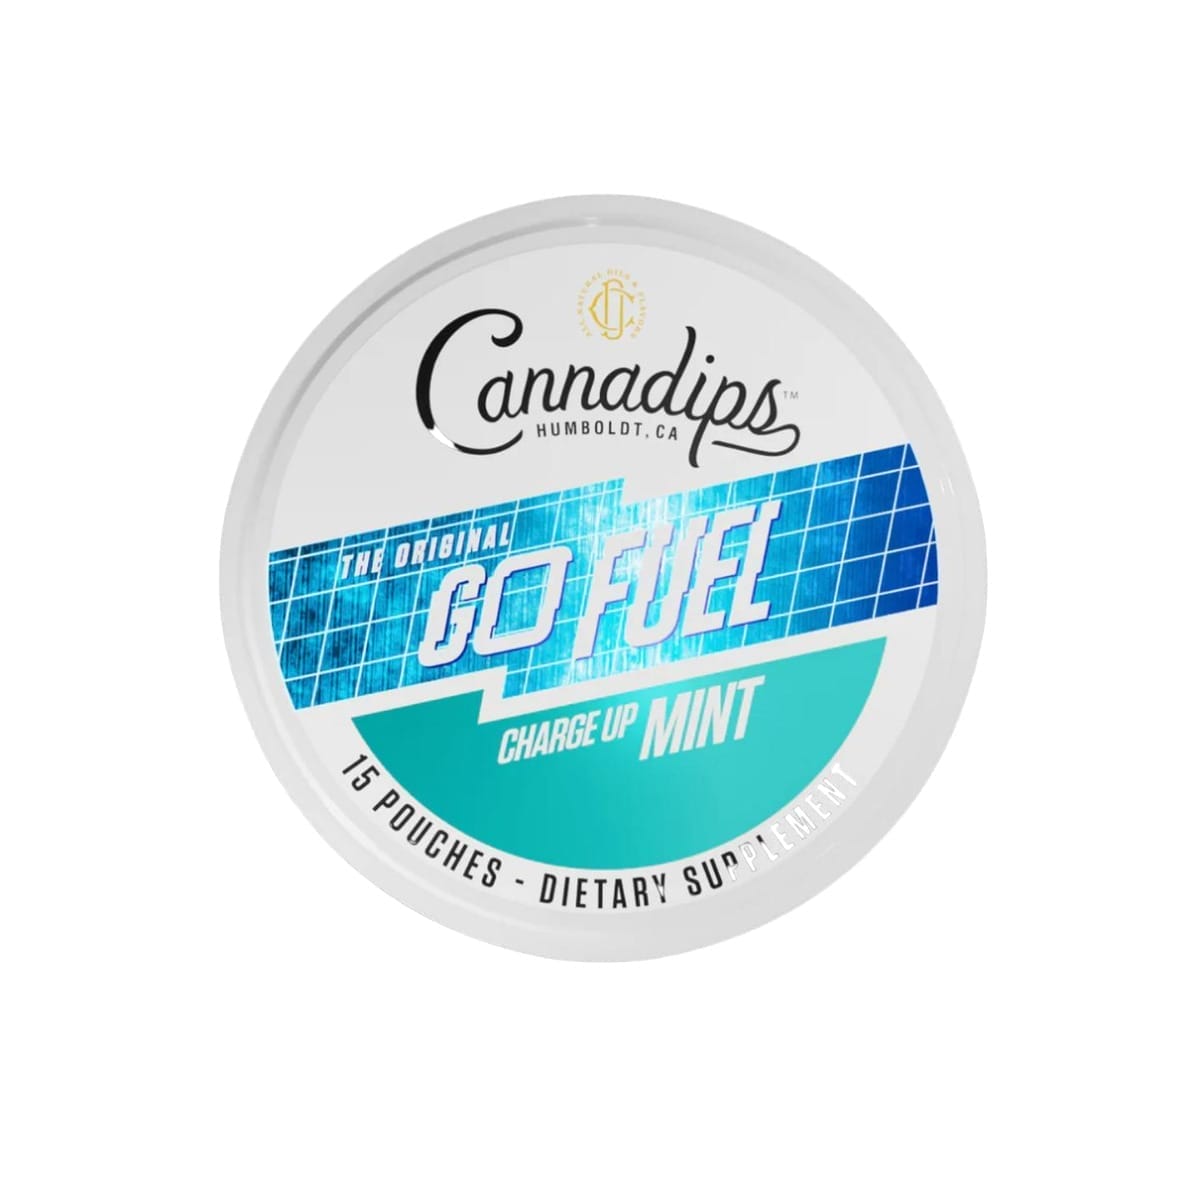 Cannadips "Go Fuel" Charge Up CBG + Caffeine Pouches - Mint